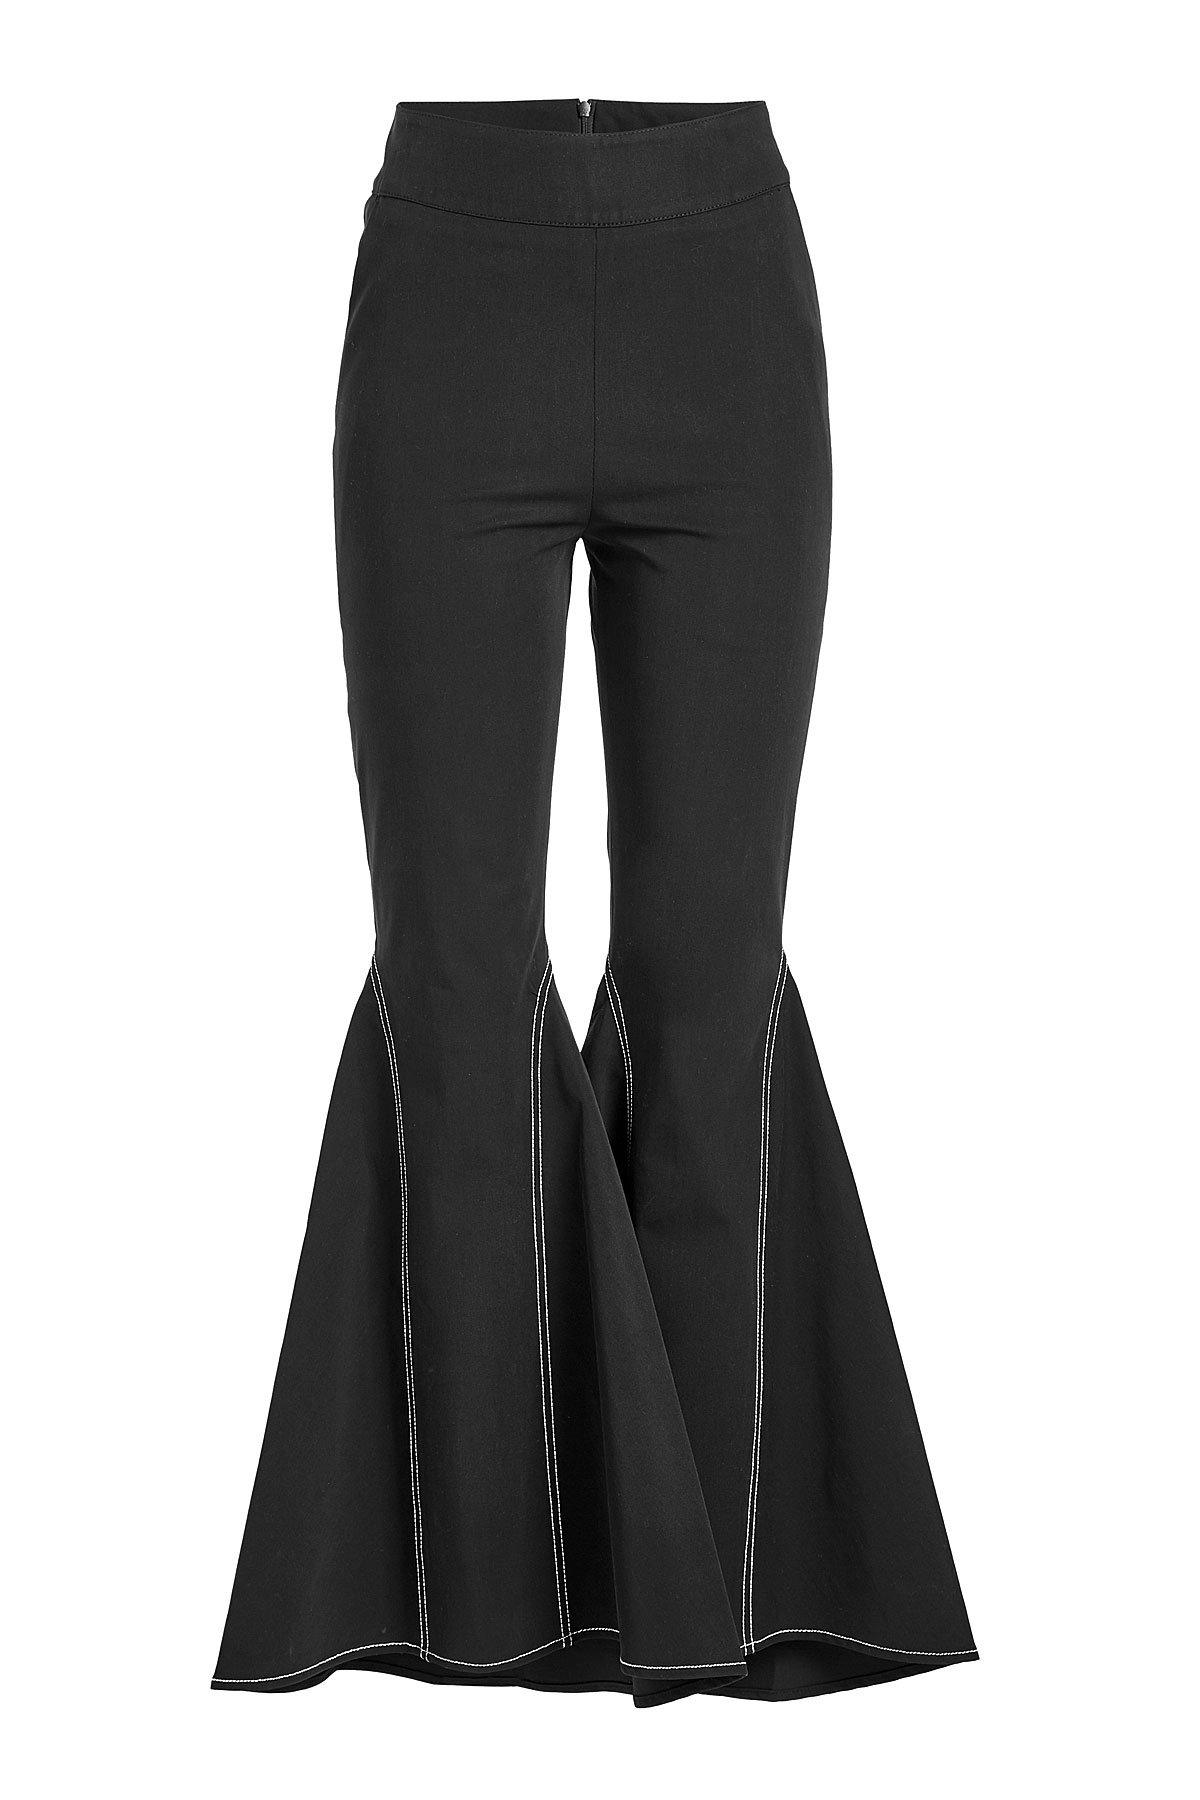 Lyst - Beaufille Aldra Flared Cotton Pants in Black